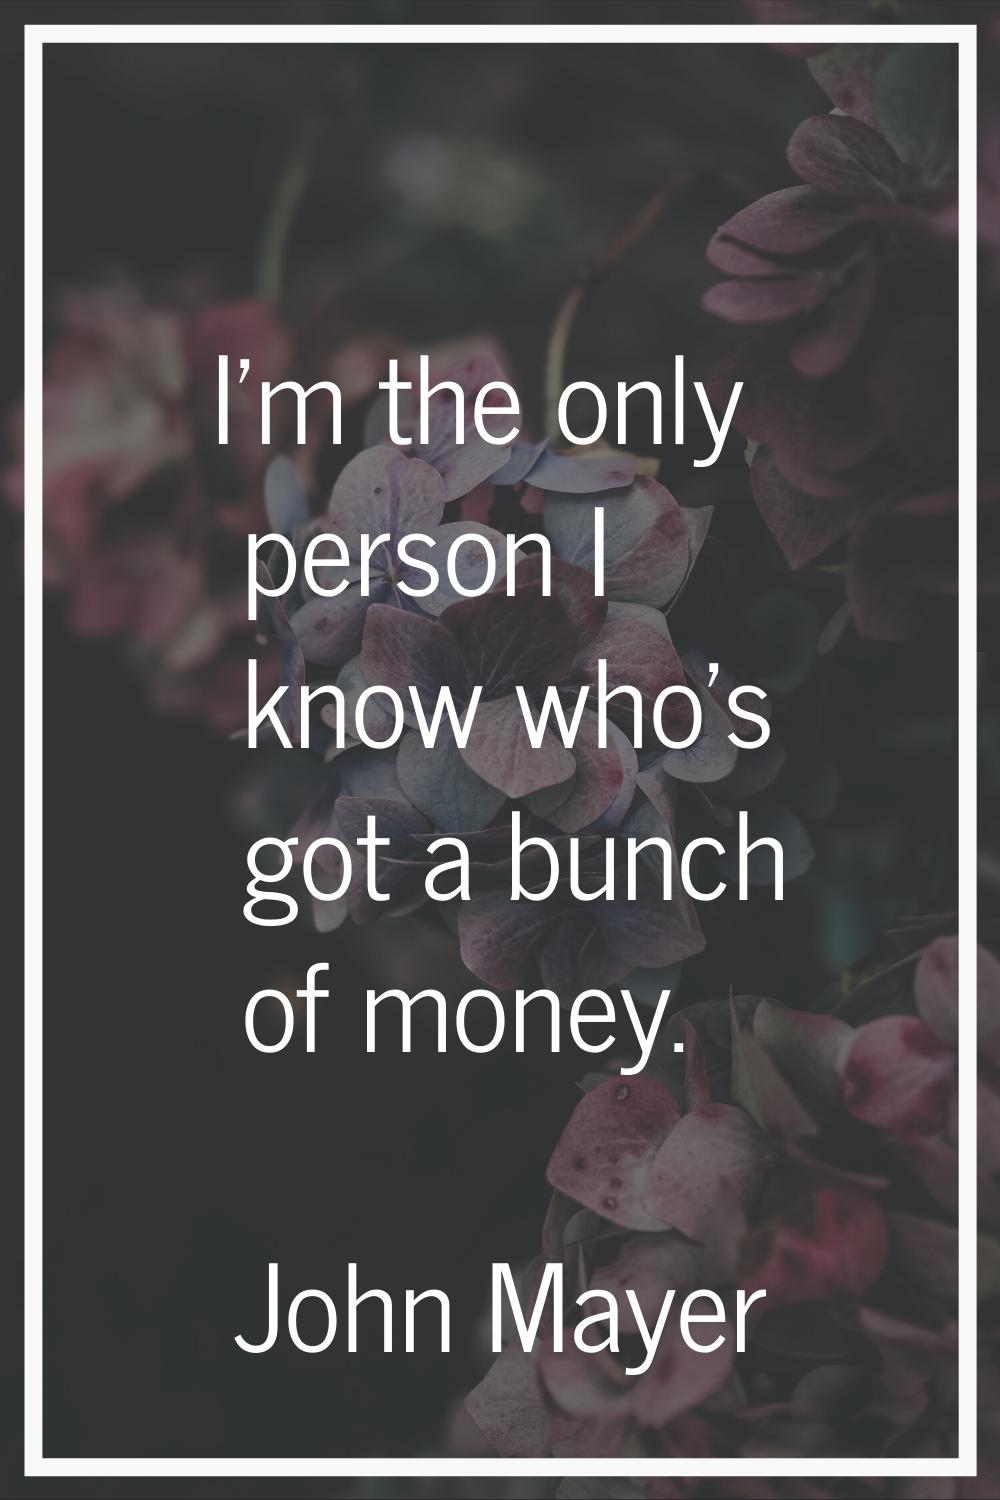 I'm the only person I know who's got a bunch of money.